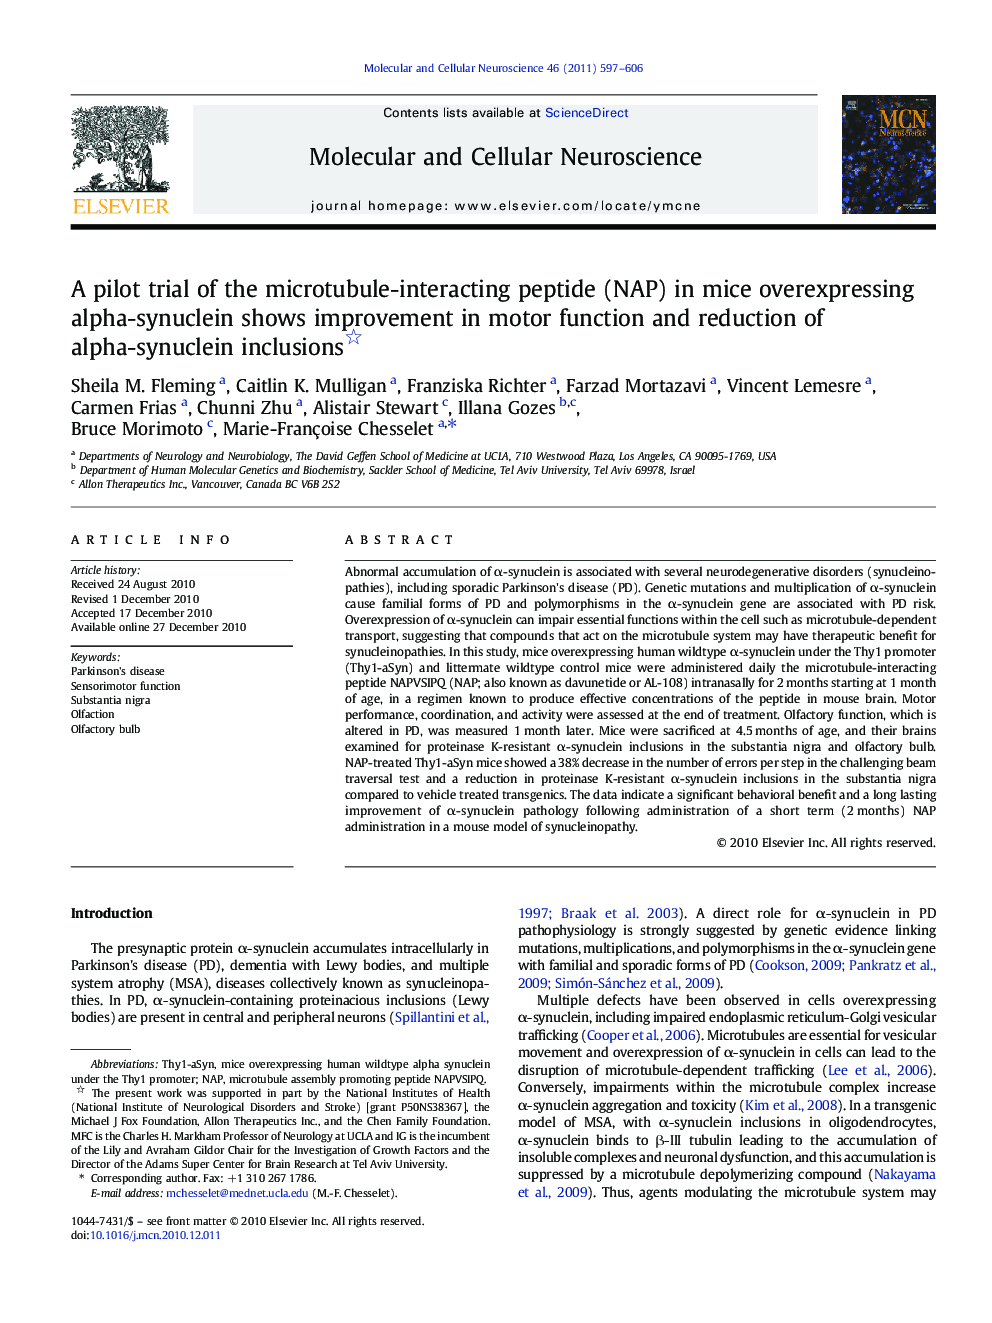 A pilot trial of the microtubule-interacting peptide (NAP) in mice overexpressing alpha-synuclein shows improvement in motor function and reduction of alpha-synuclein inclusions 